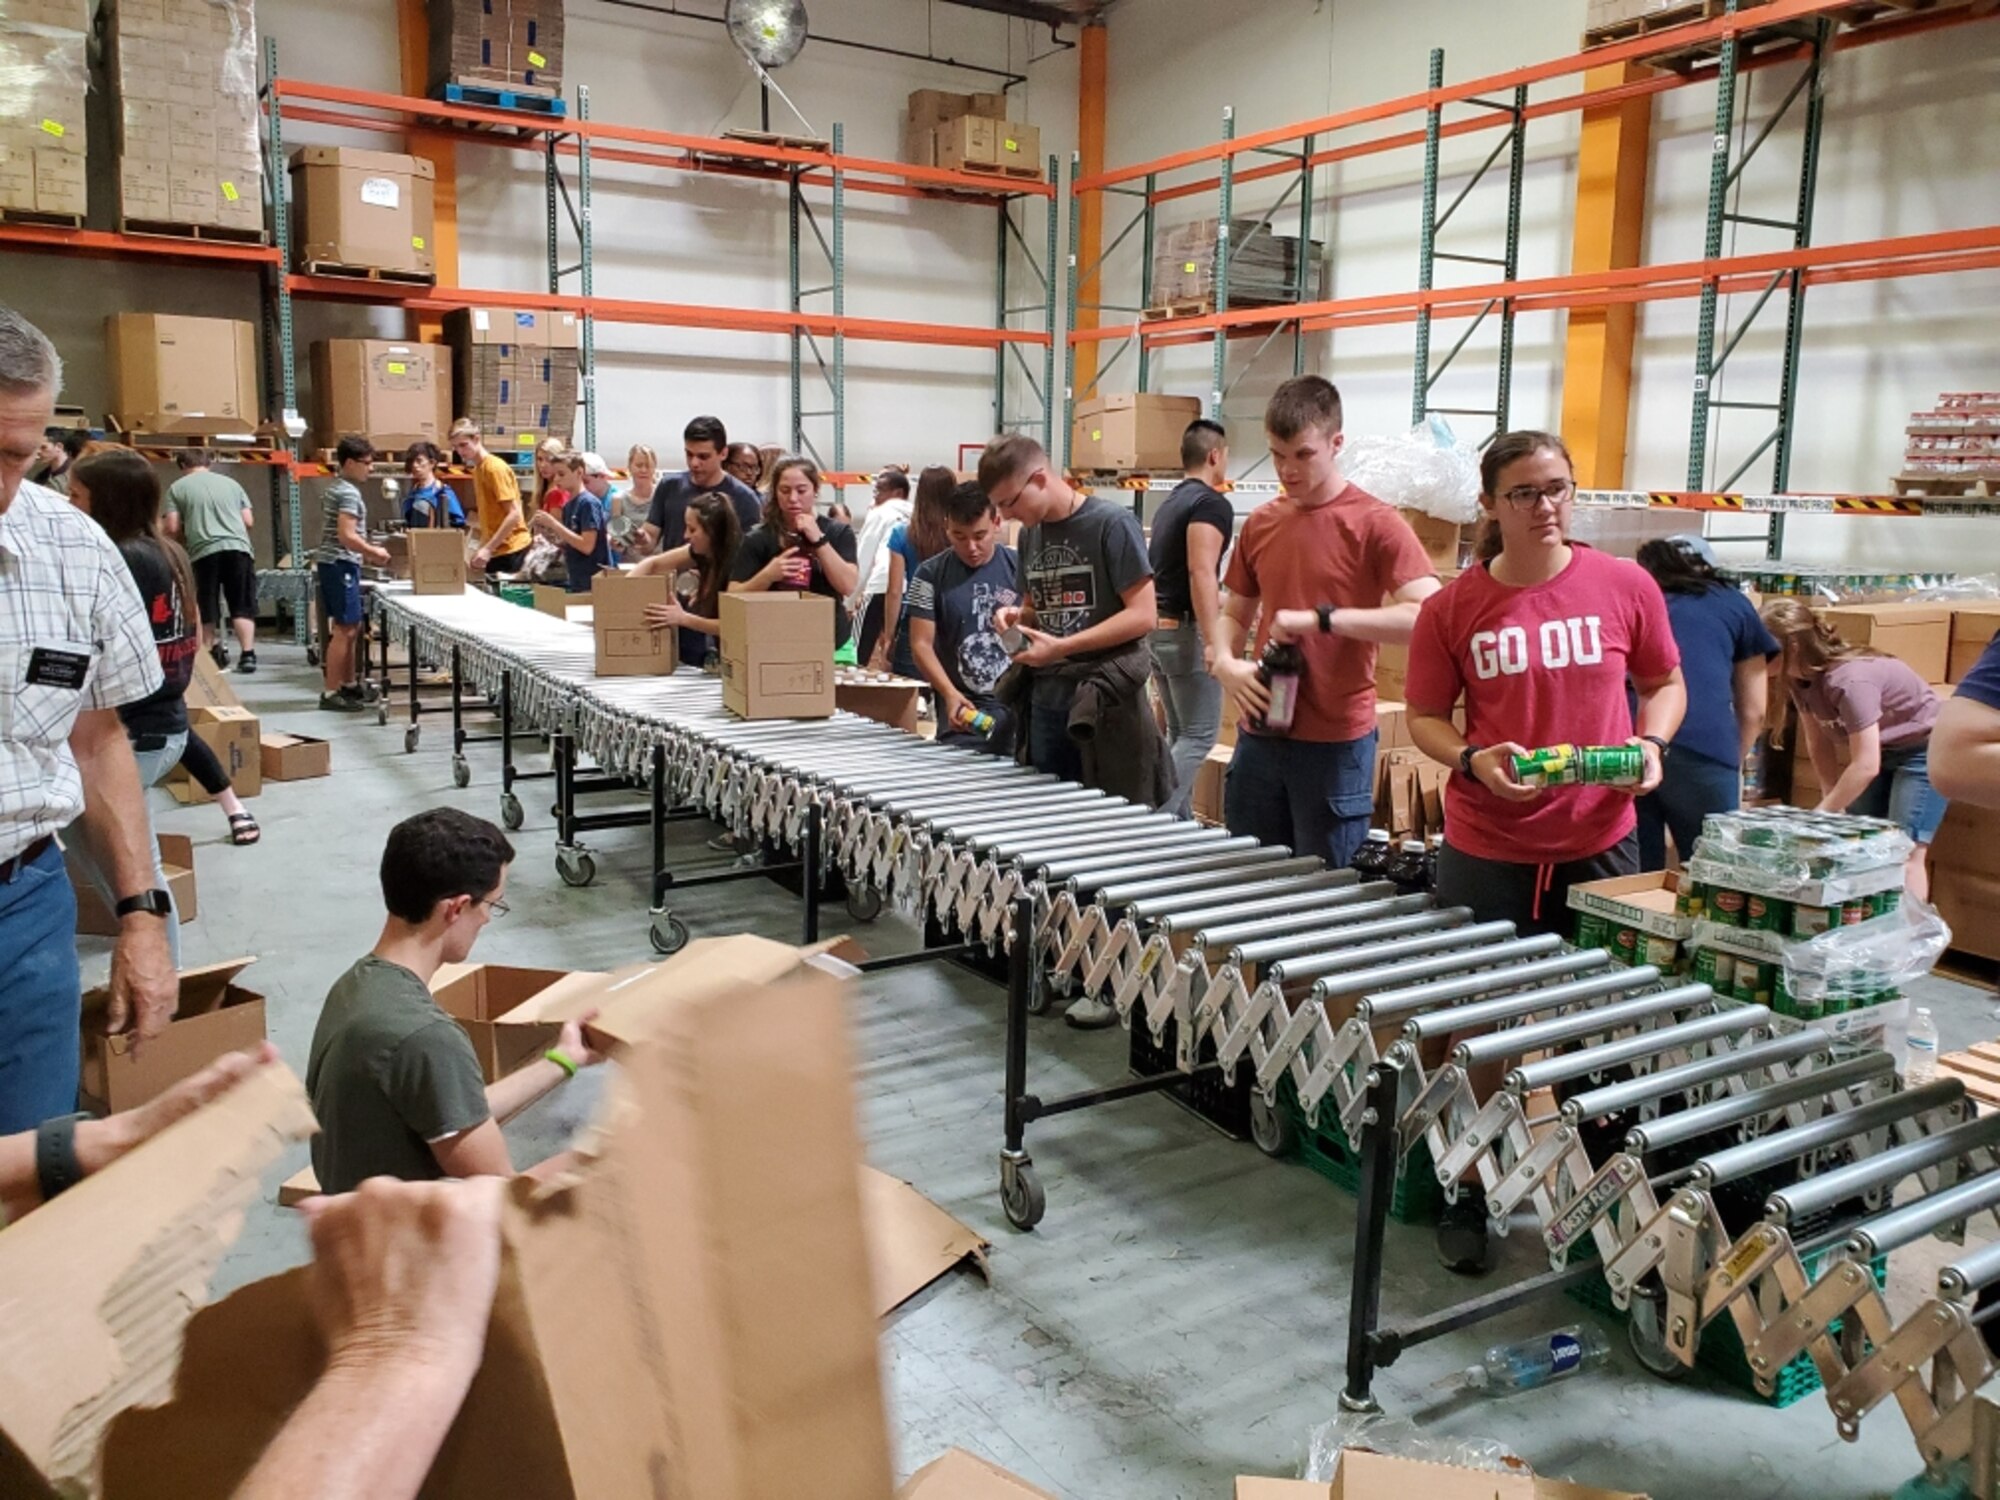 Airmen assigned to the 56th Fighter Wing volunteer at St. Mary’s Food Bank Alliance, packing emergency food boxes, June 8, 2019, in Phoenix.